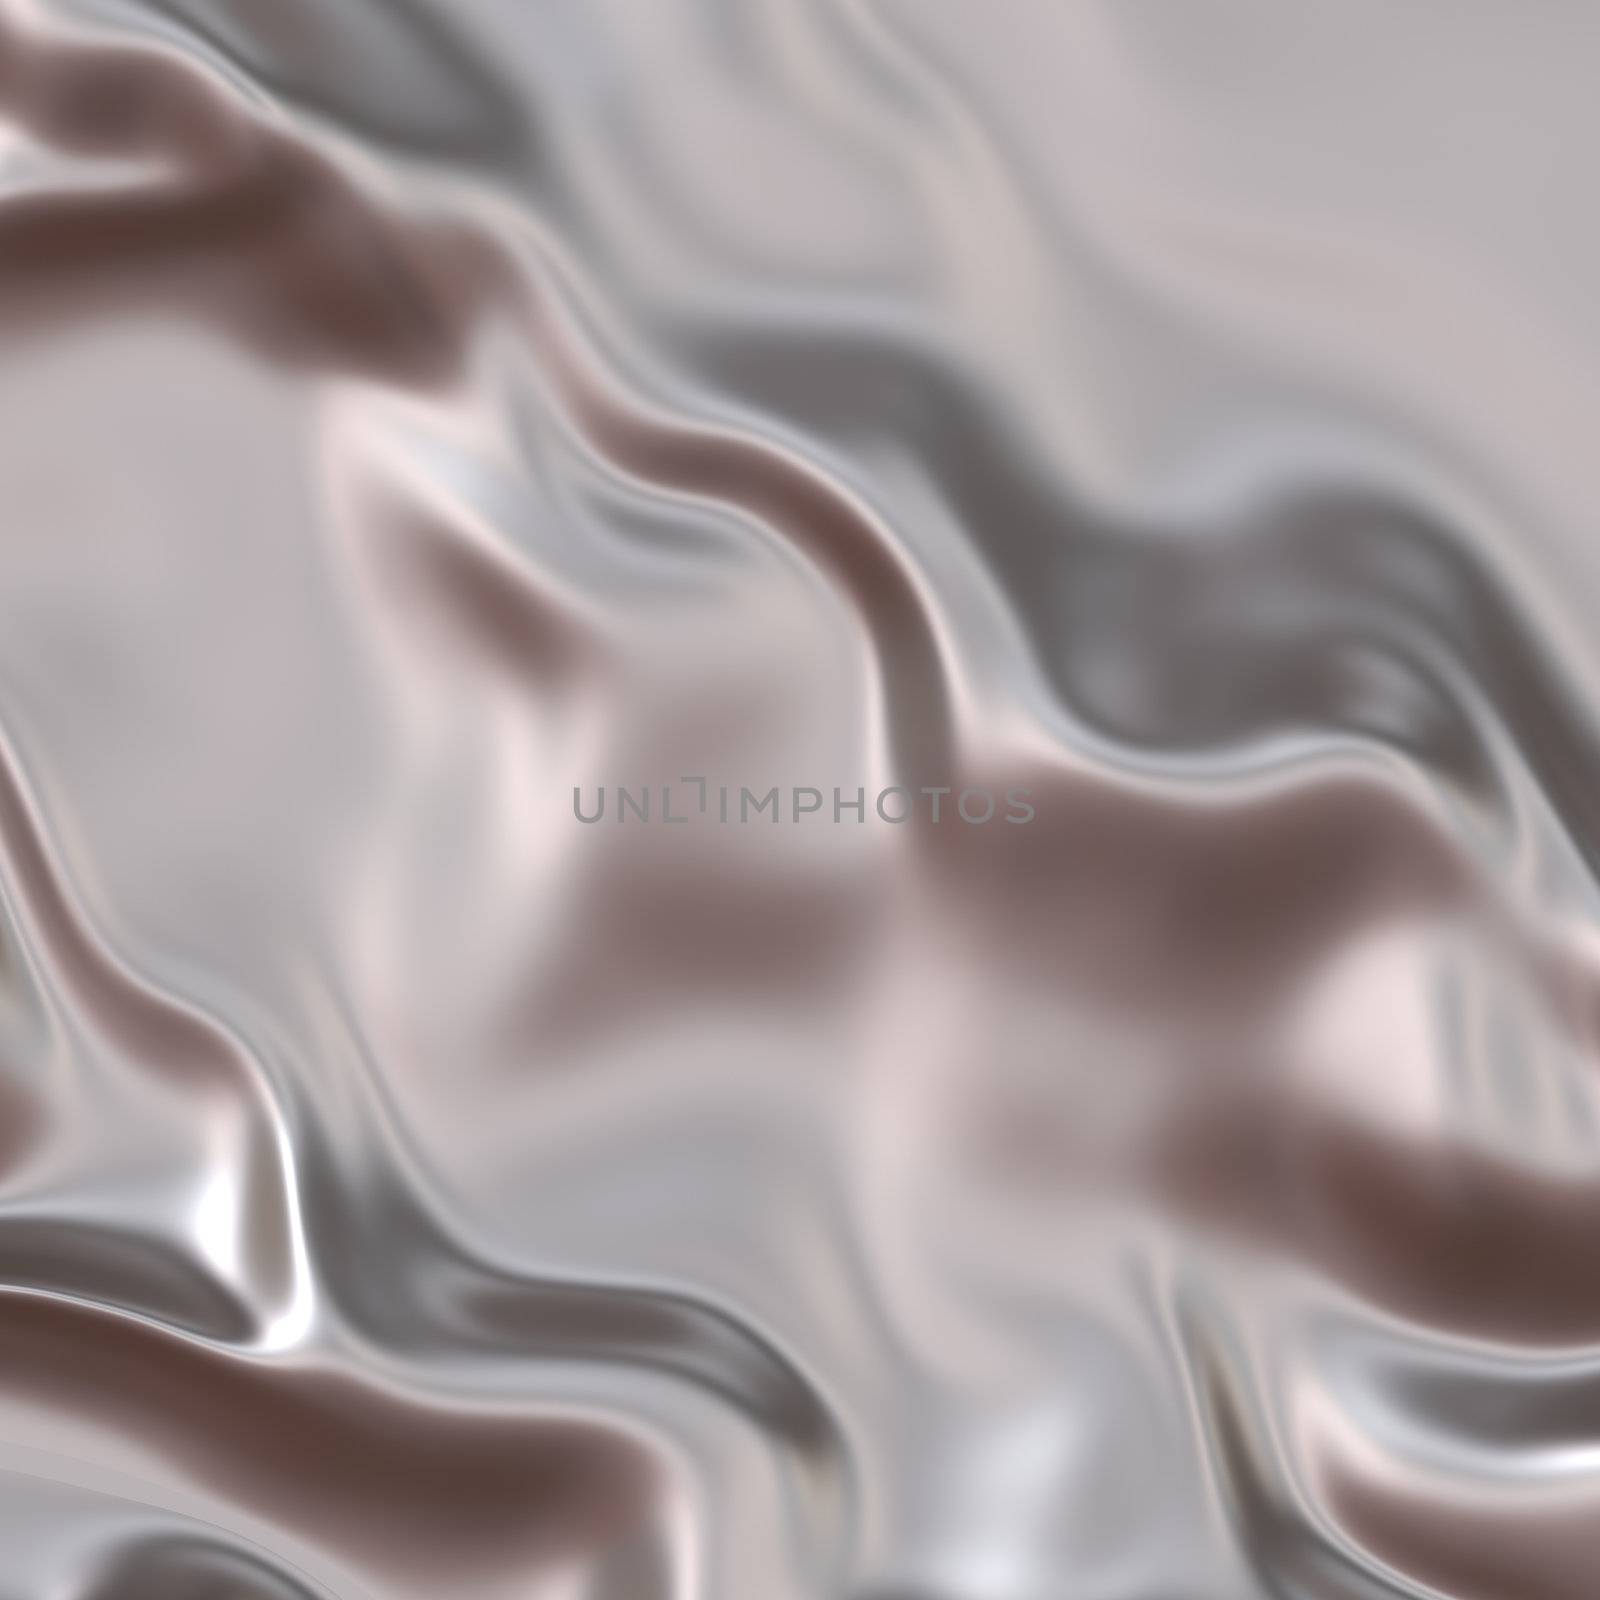 An image of a nice silk background